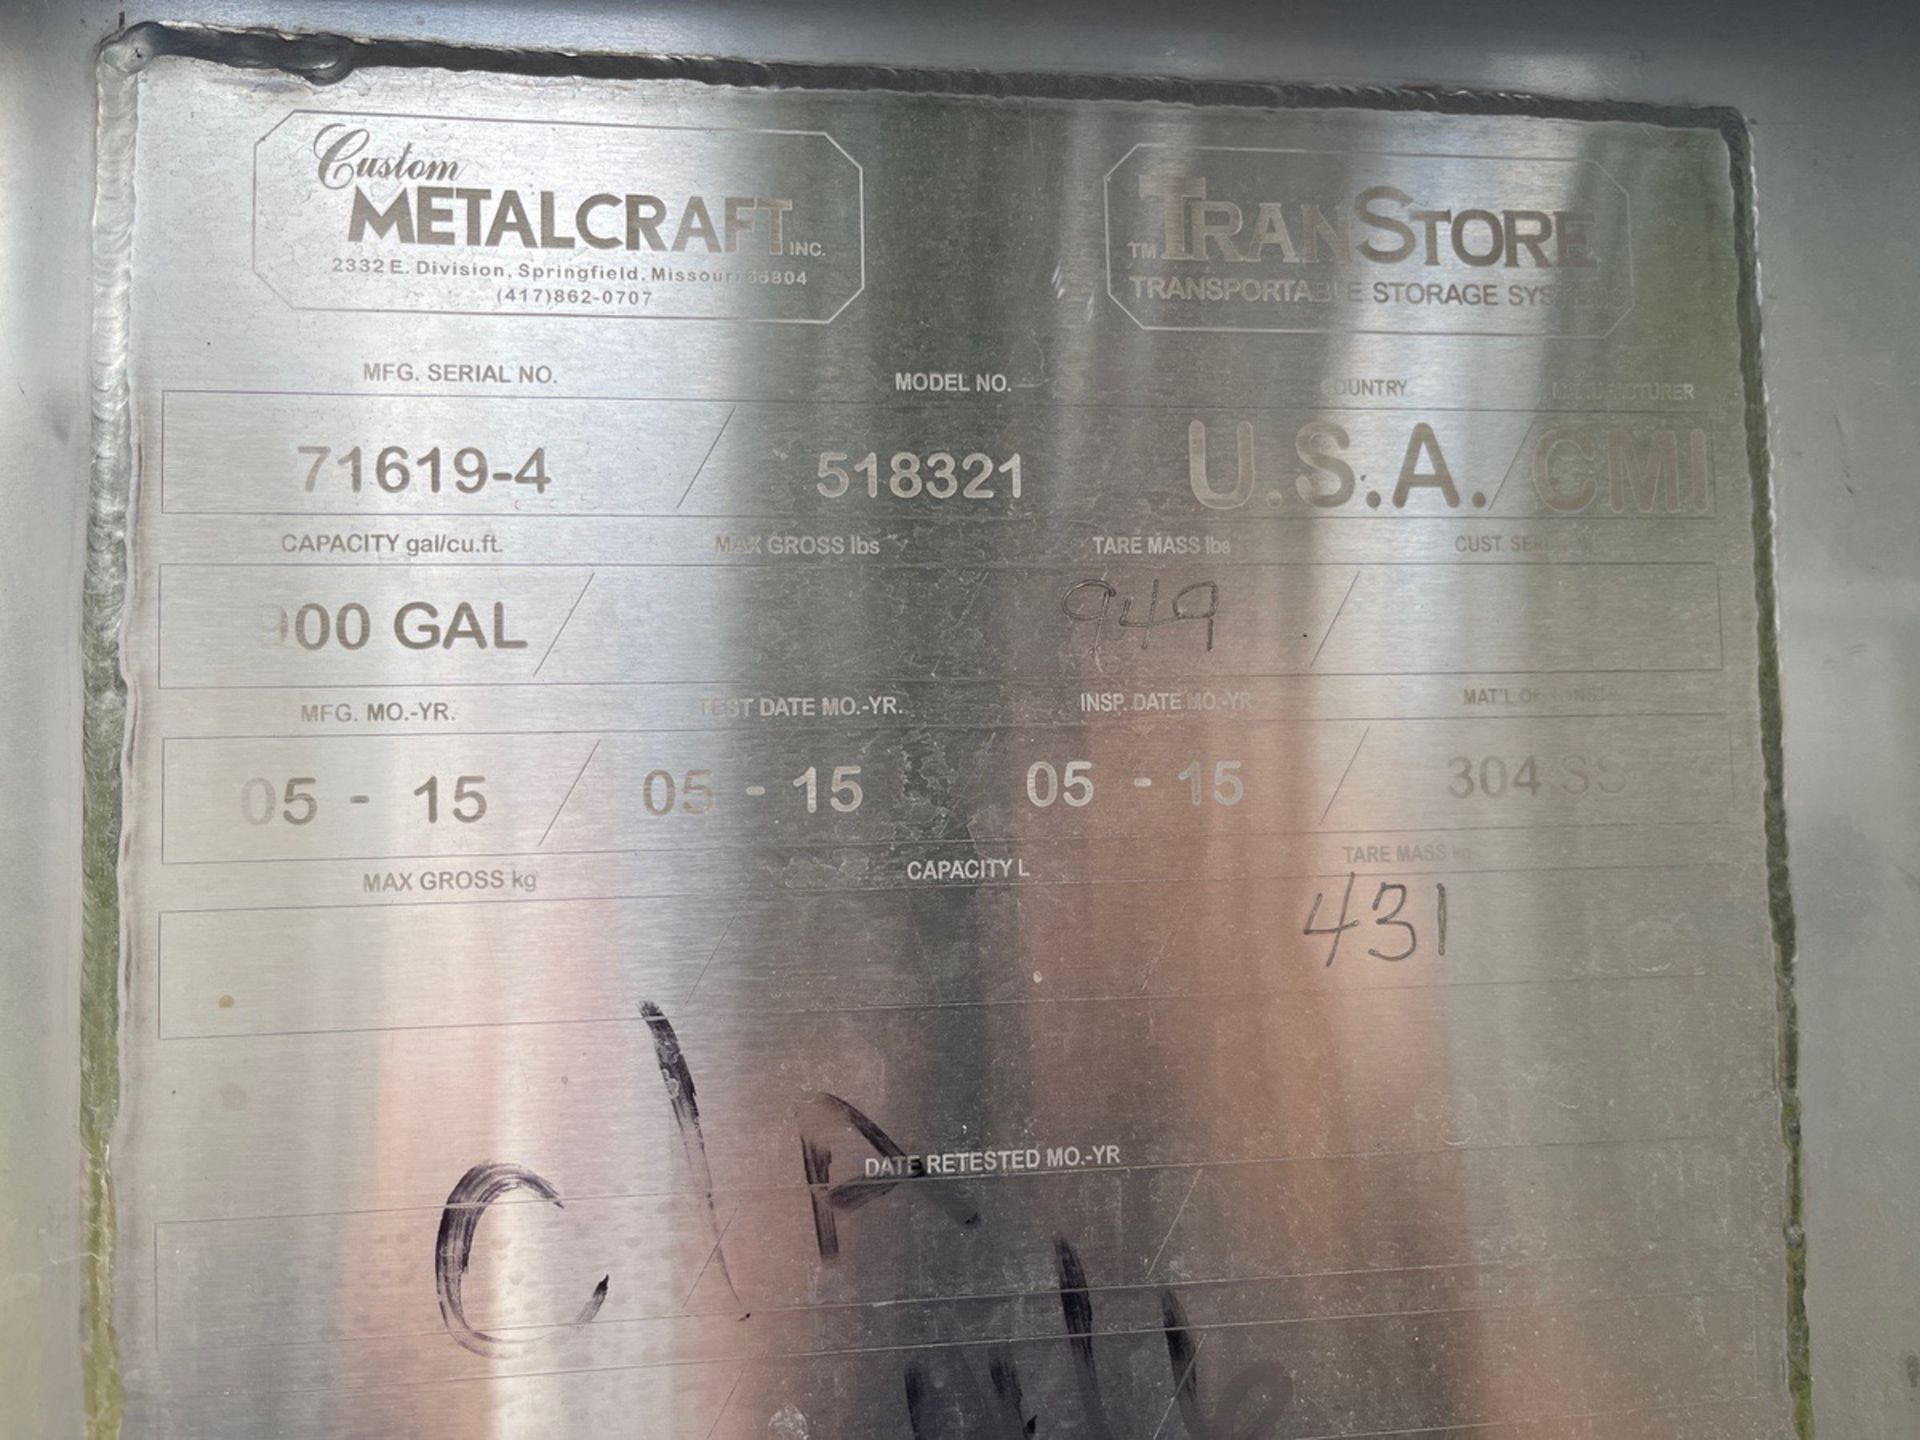 Metalcraft 900 Gallon Stainless Steel Tote, Model 518321, S/N 71619-4 (Located in | Rig Fee $100 - Image 2 of 3